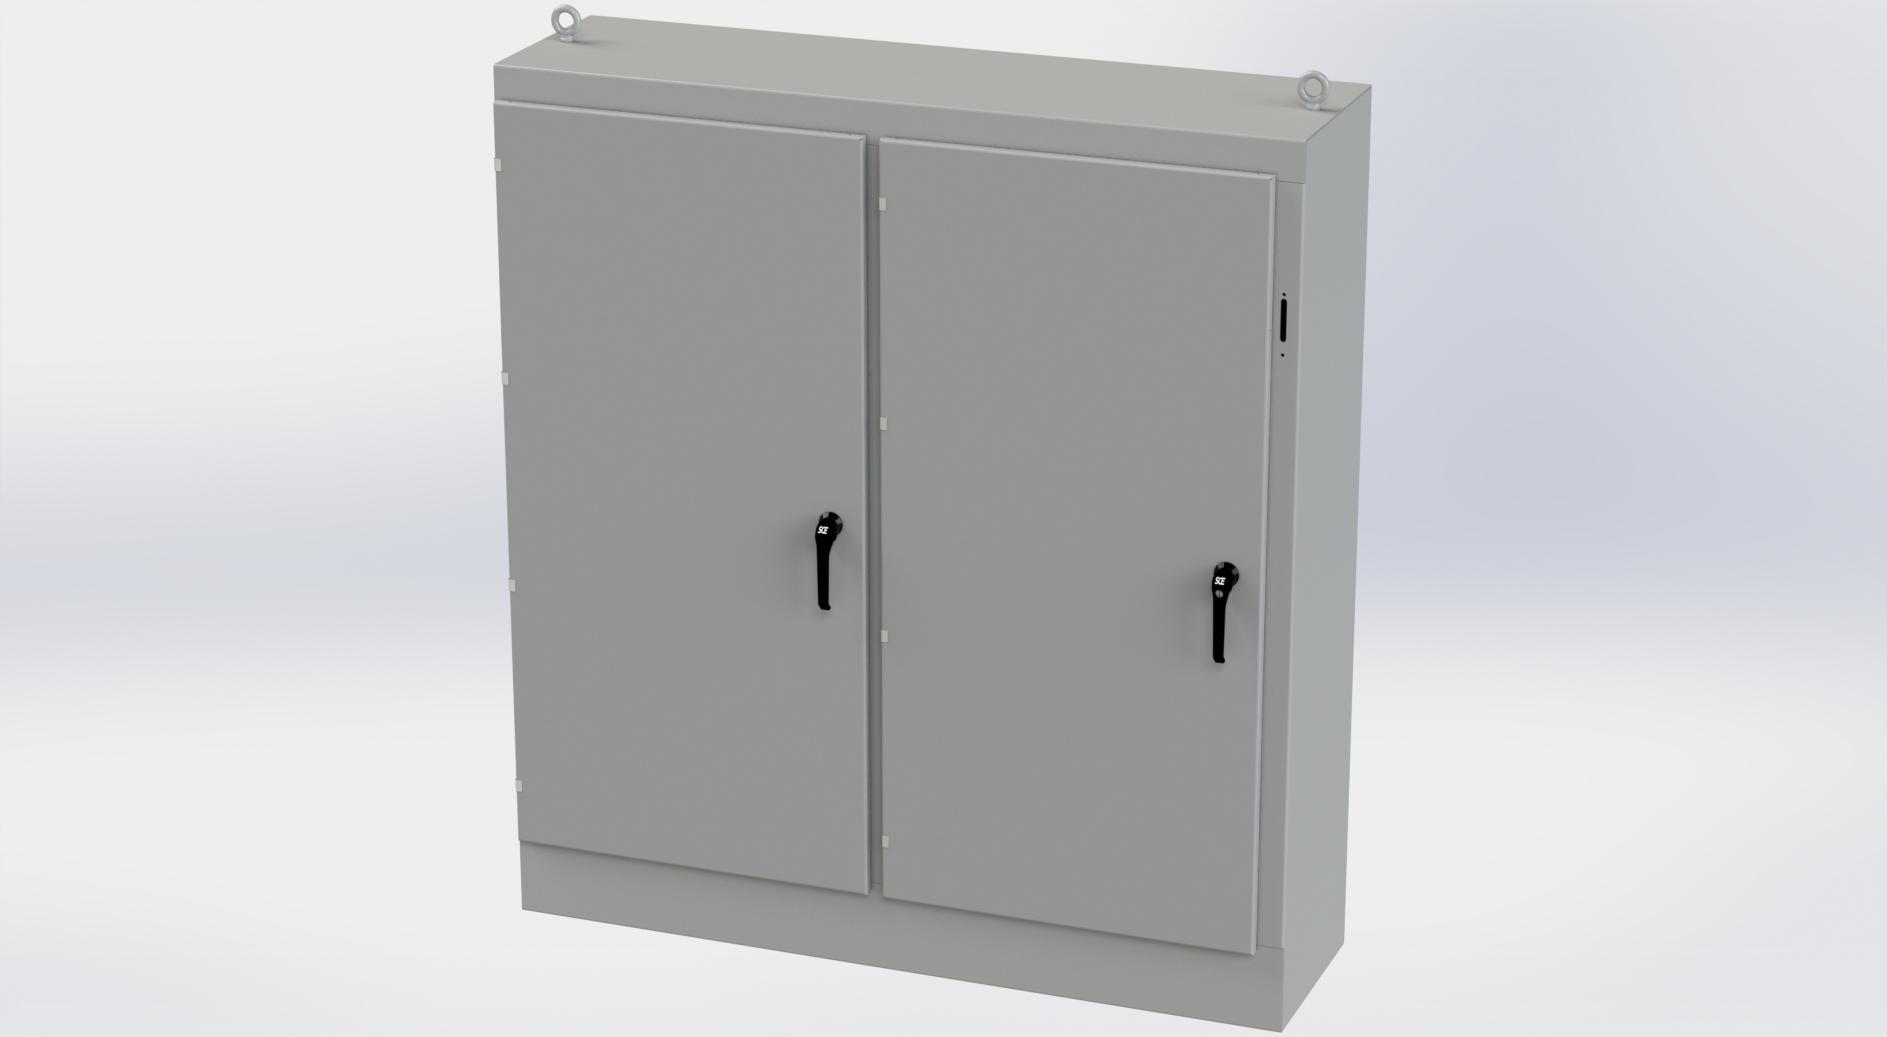 Saginaw Control SCE-72XM6618G 2DR XM Enclosure, Height:72.00", Width:65.75", Depth:18.00", ANSI-61 gray powder coating inside and out. Sub-panels are powder coated white.